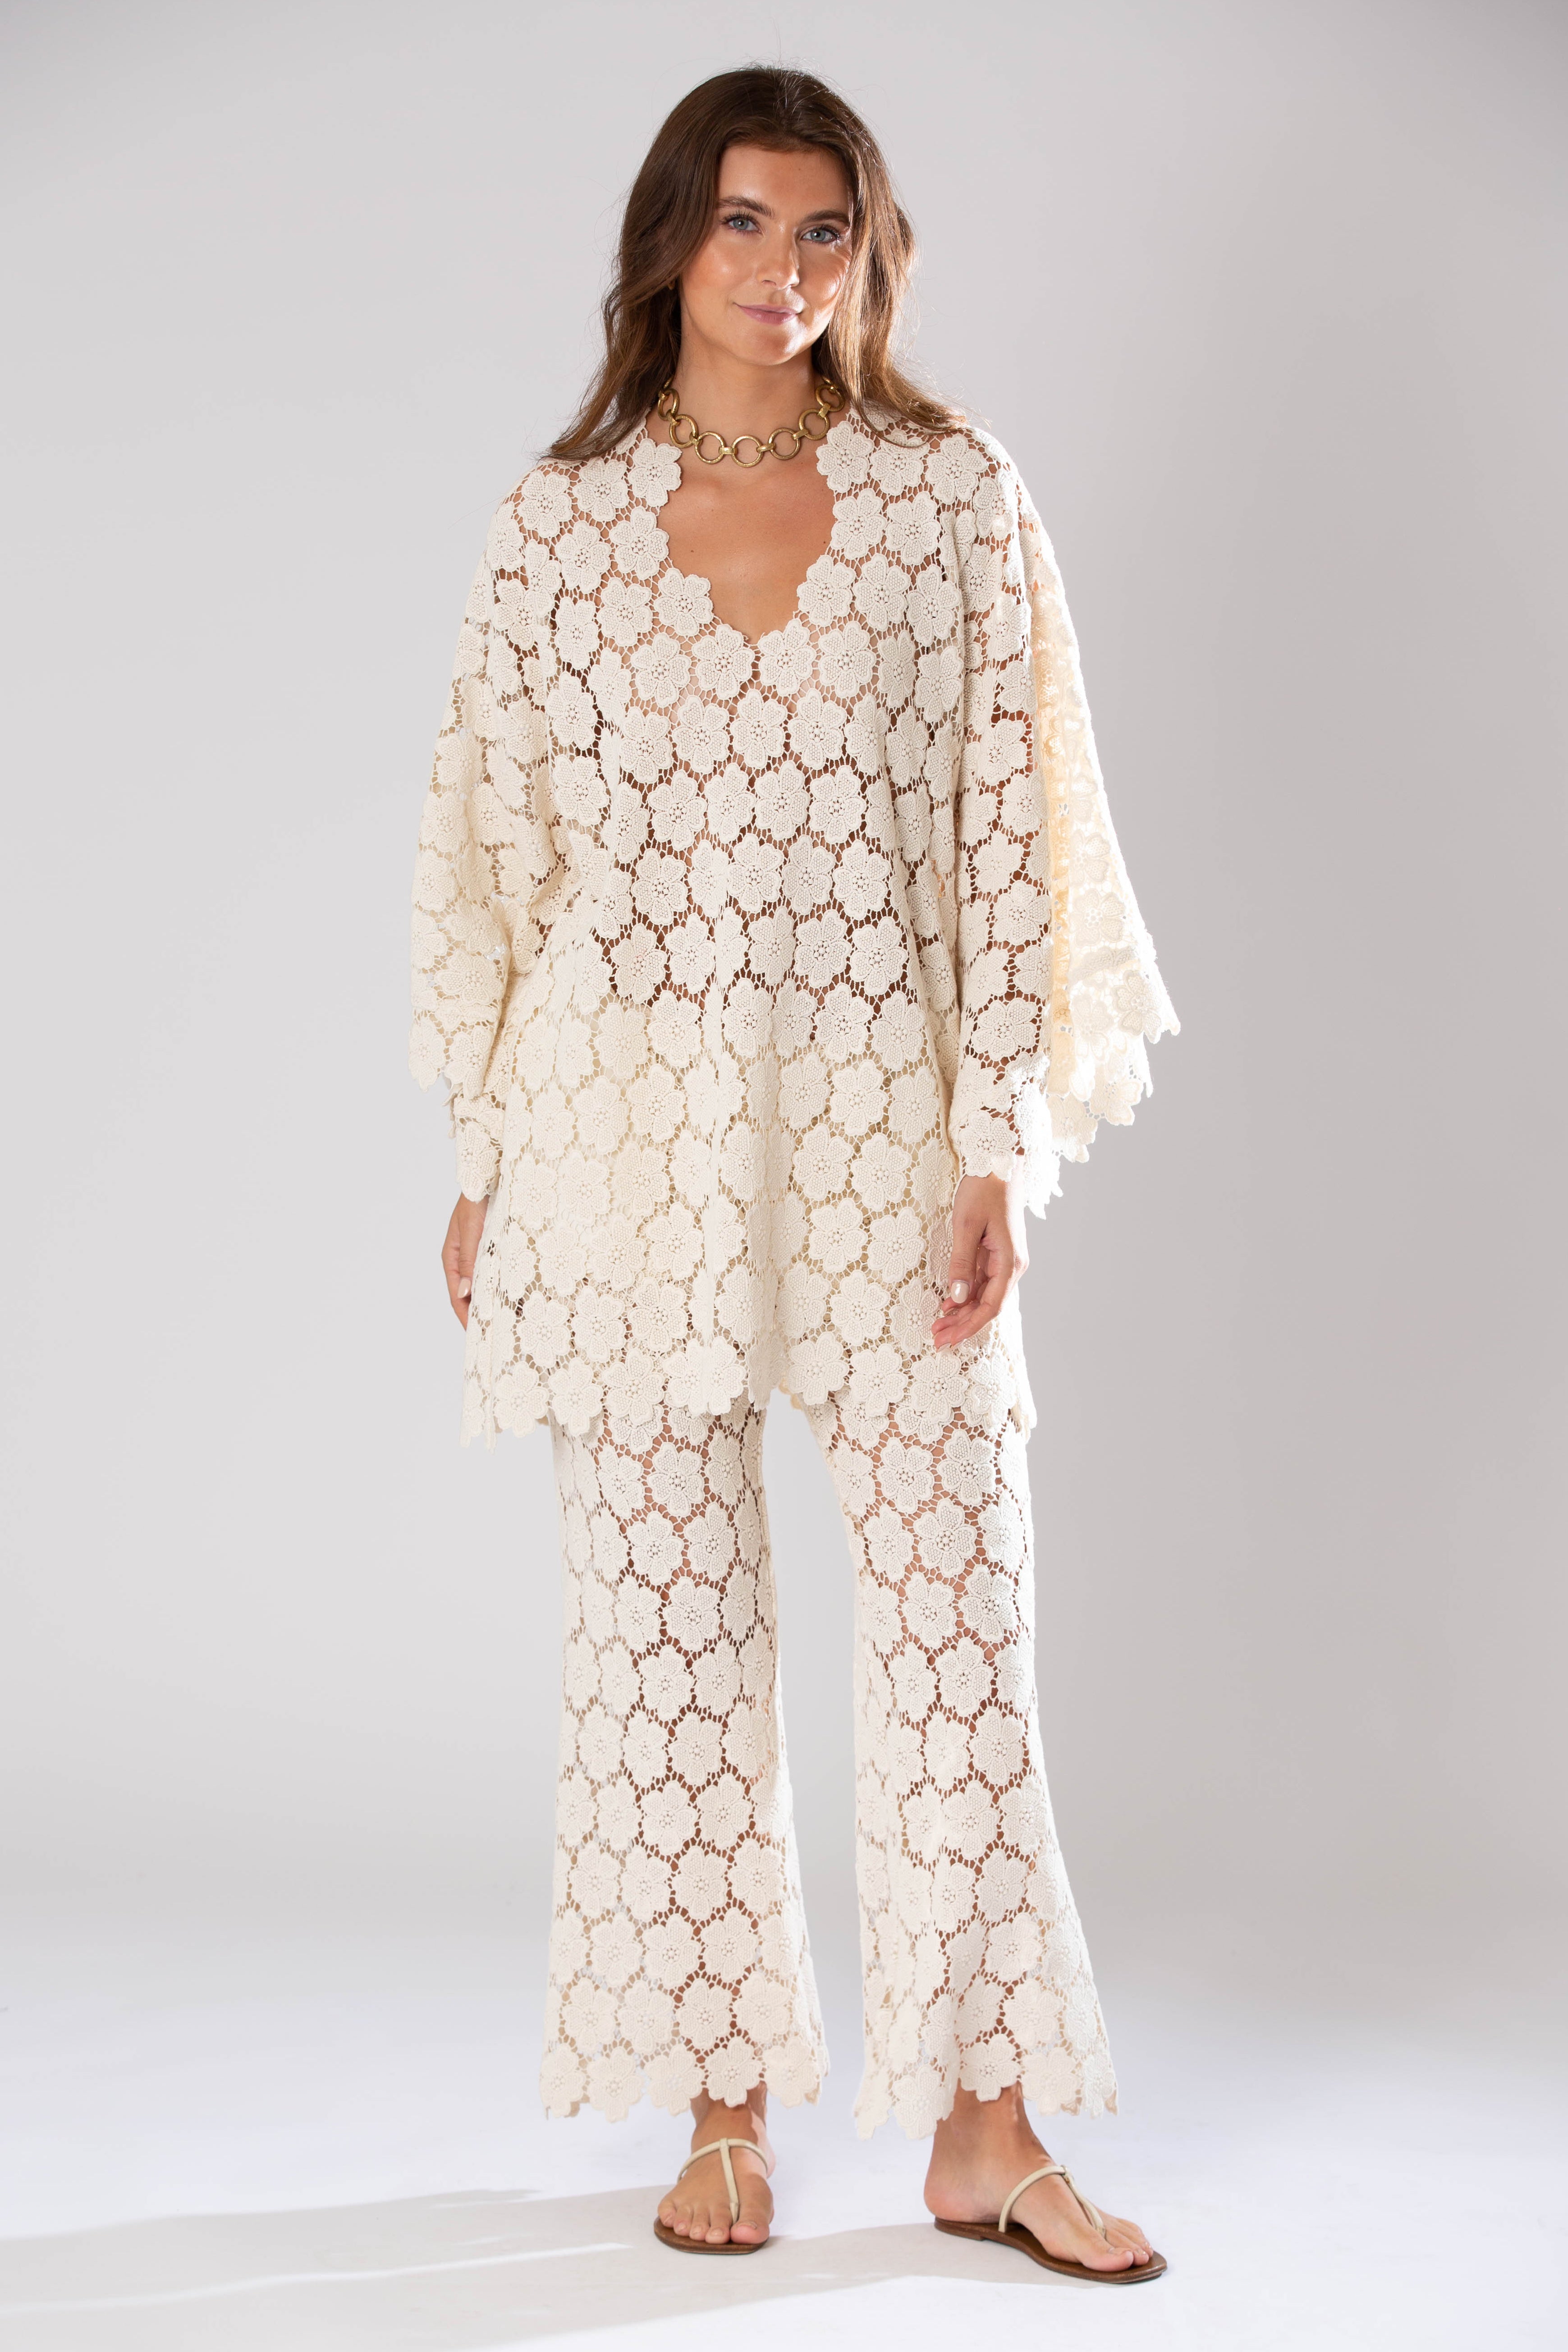 Bertie Floating Flower Lace Pants by Miguelina